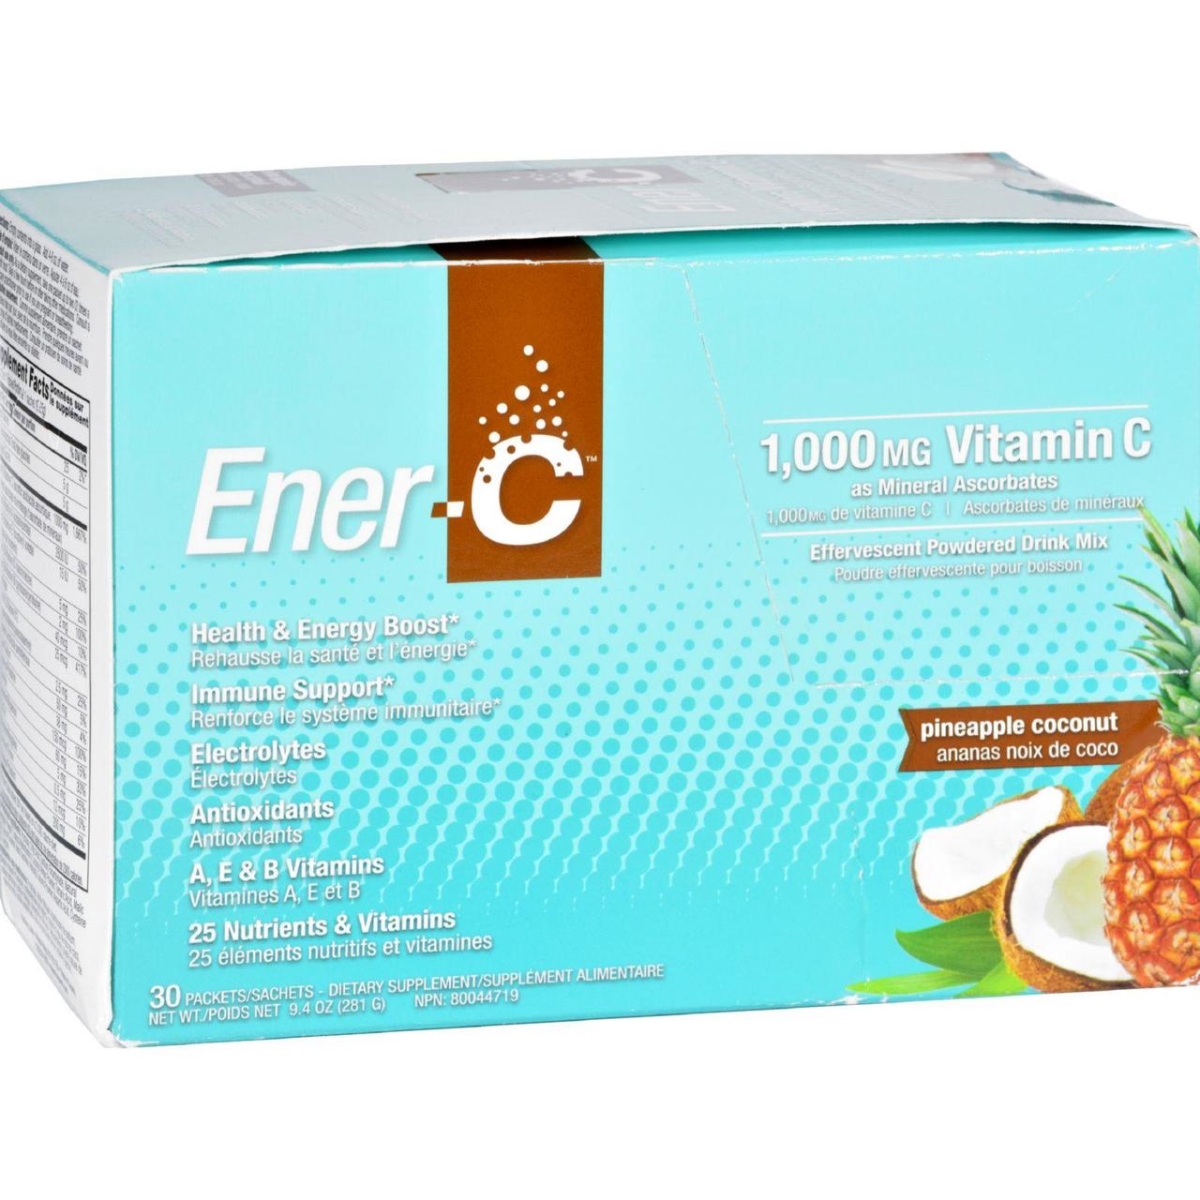 Hg1699693 1000 Mg Vitamin Drink Mix - Pineapple Coconut, 30 Packet